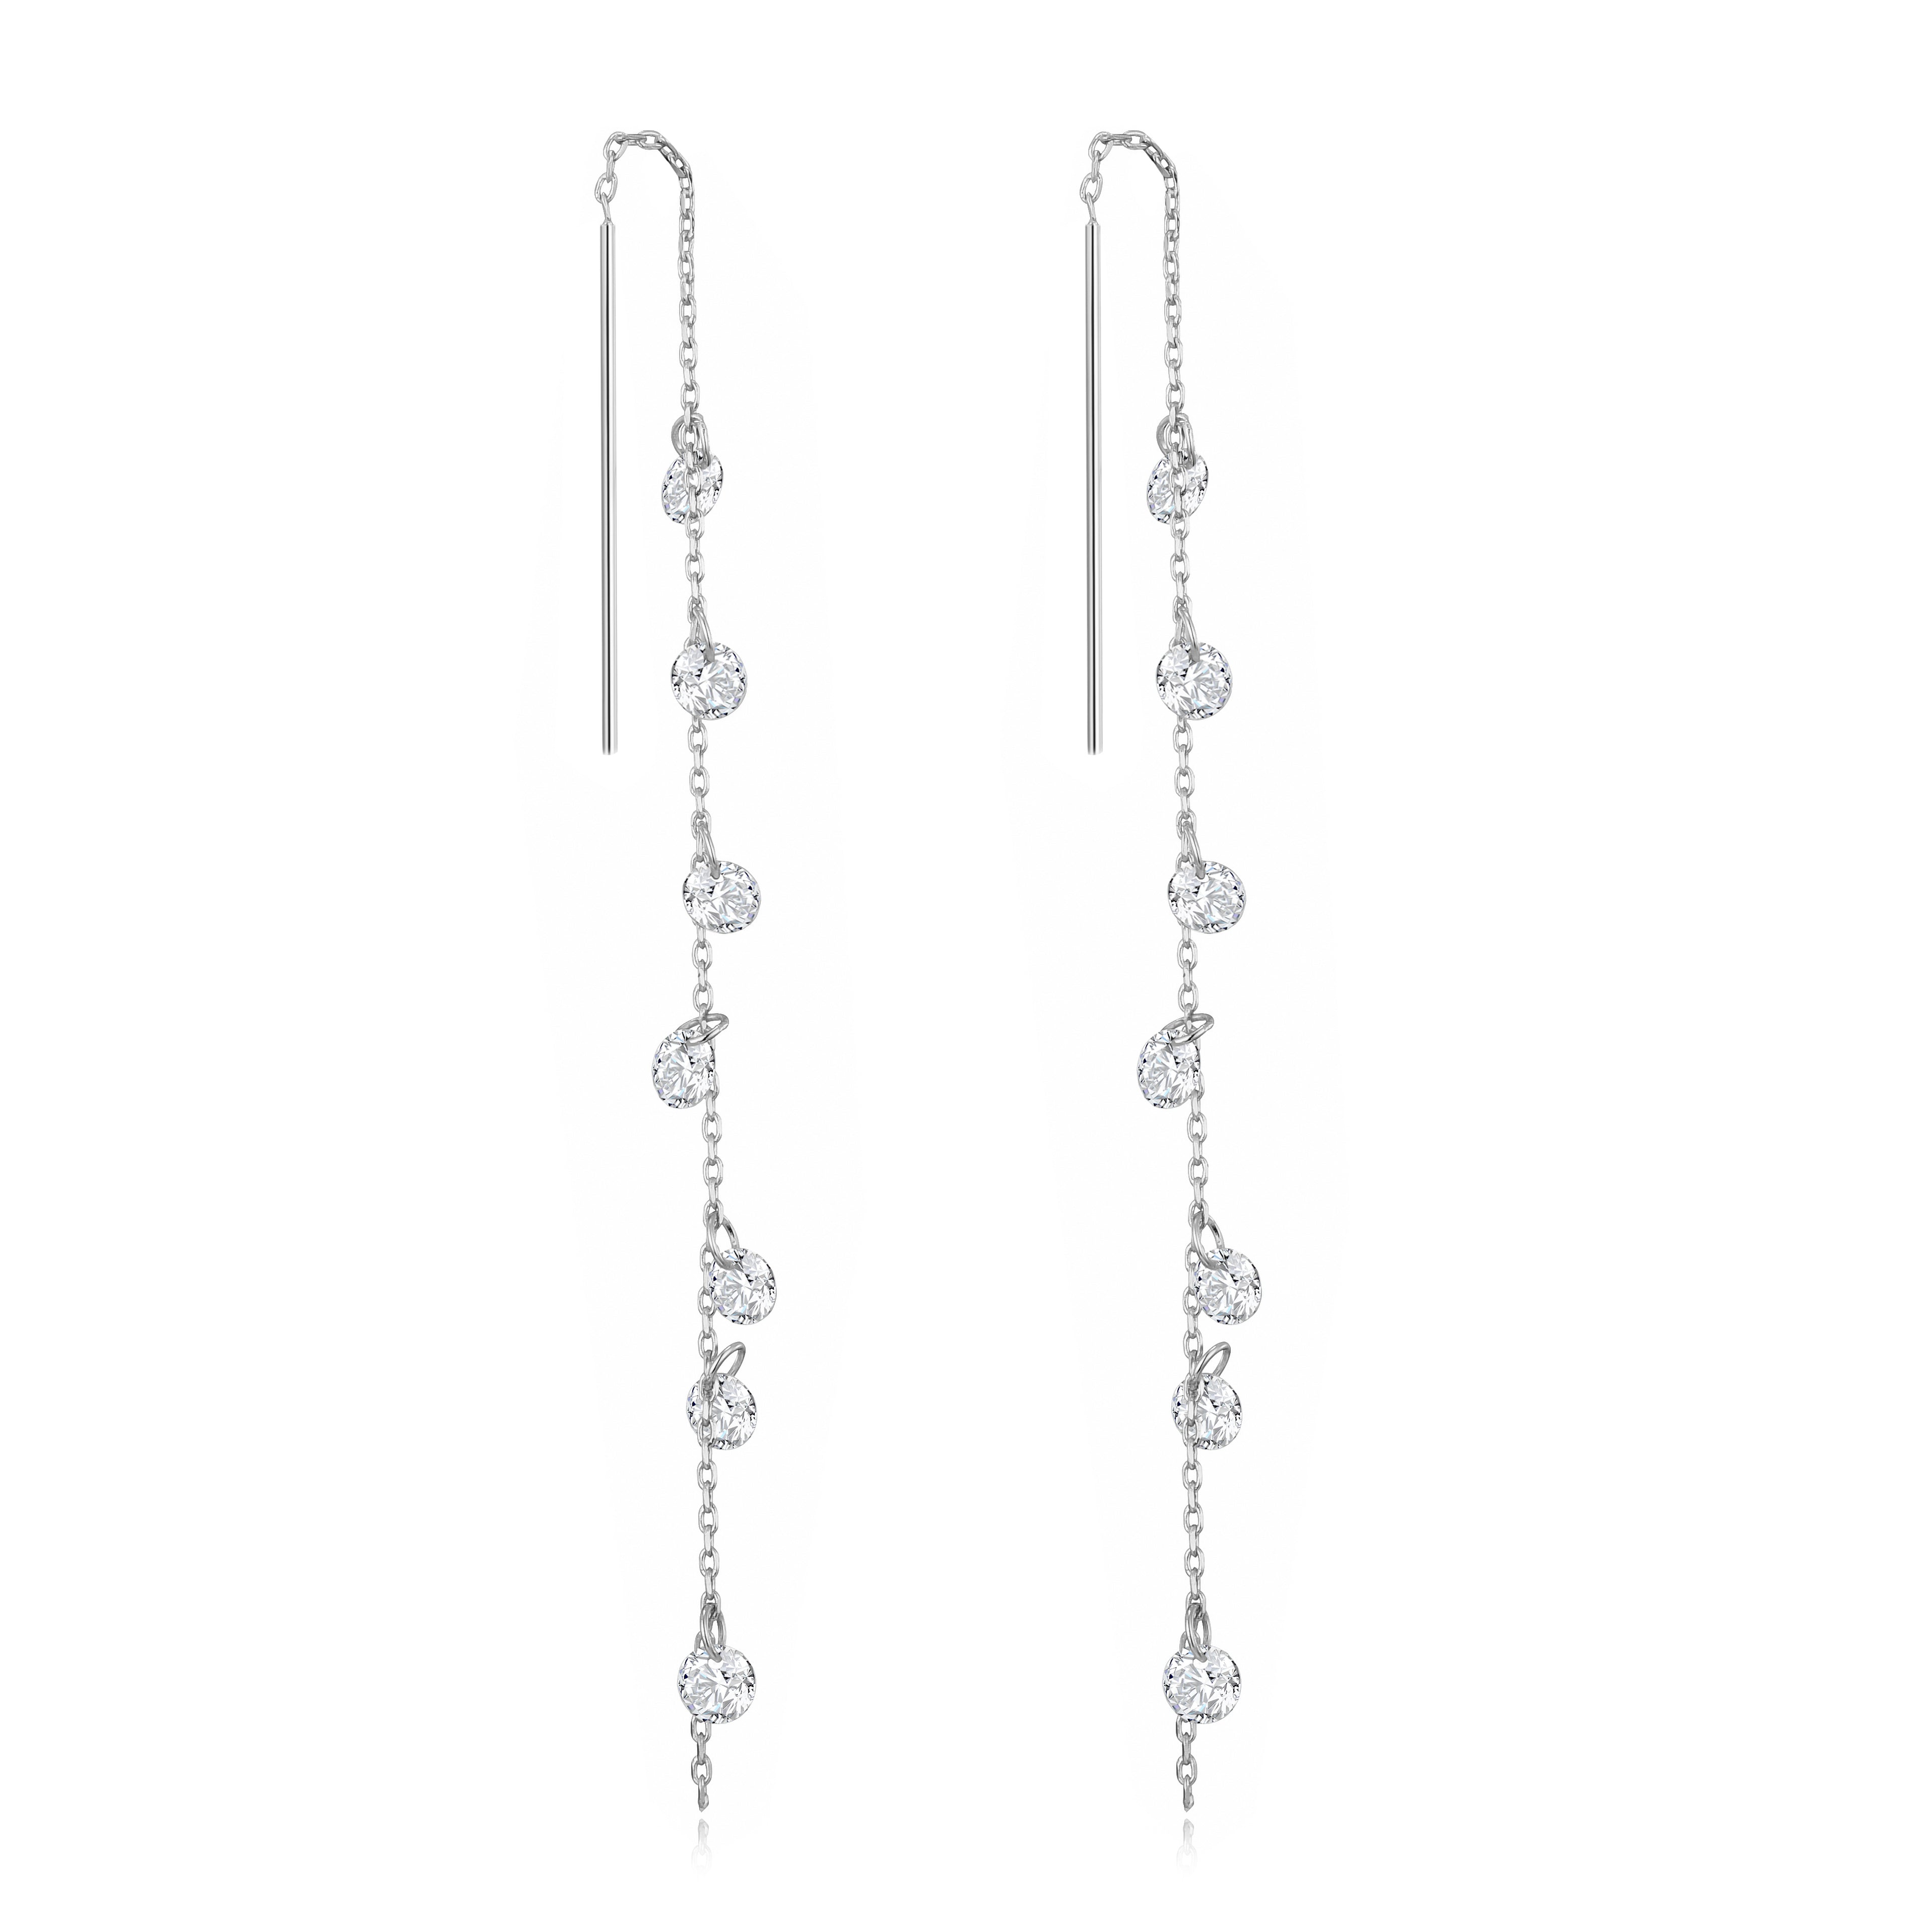 Silver Plated Dangle Thread Earrings Created with Zircondia® Crystals by Philip Jones Jewellery